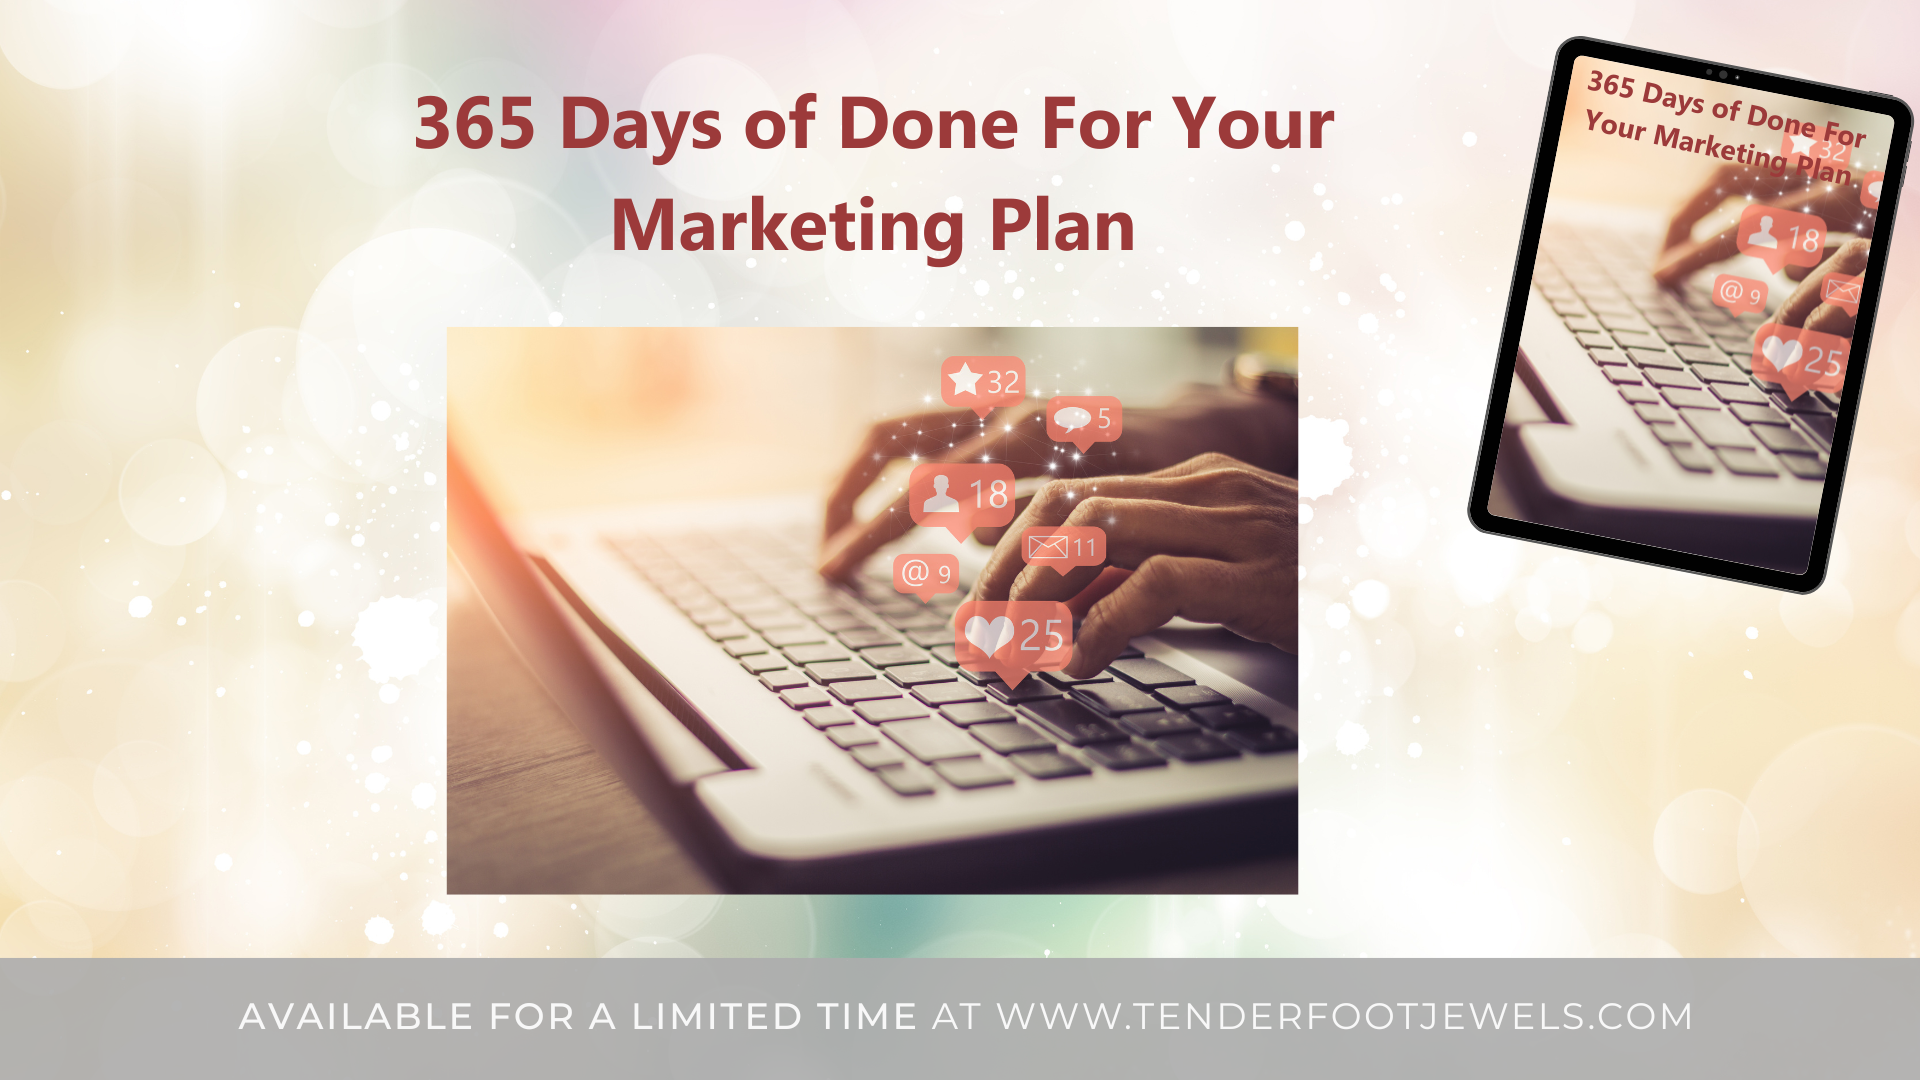 THE 365 DAYS DONE-FOR-YOU MARKETING PLAN